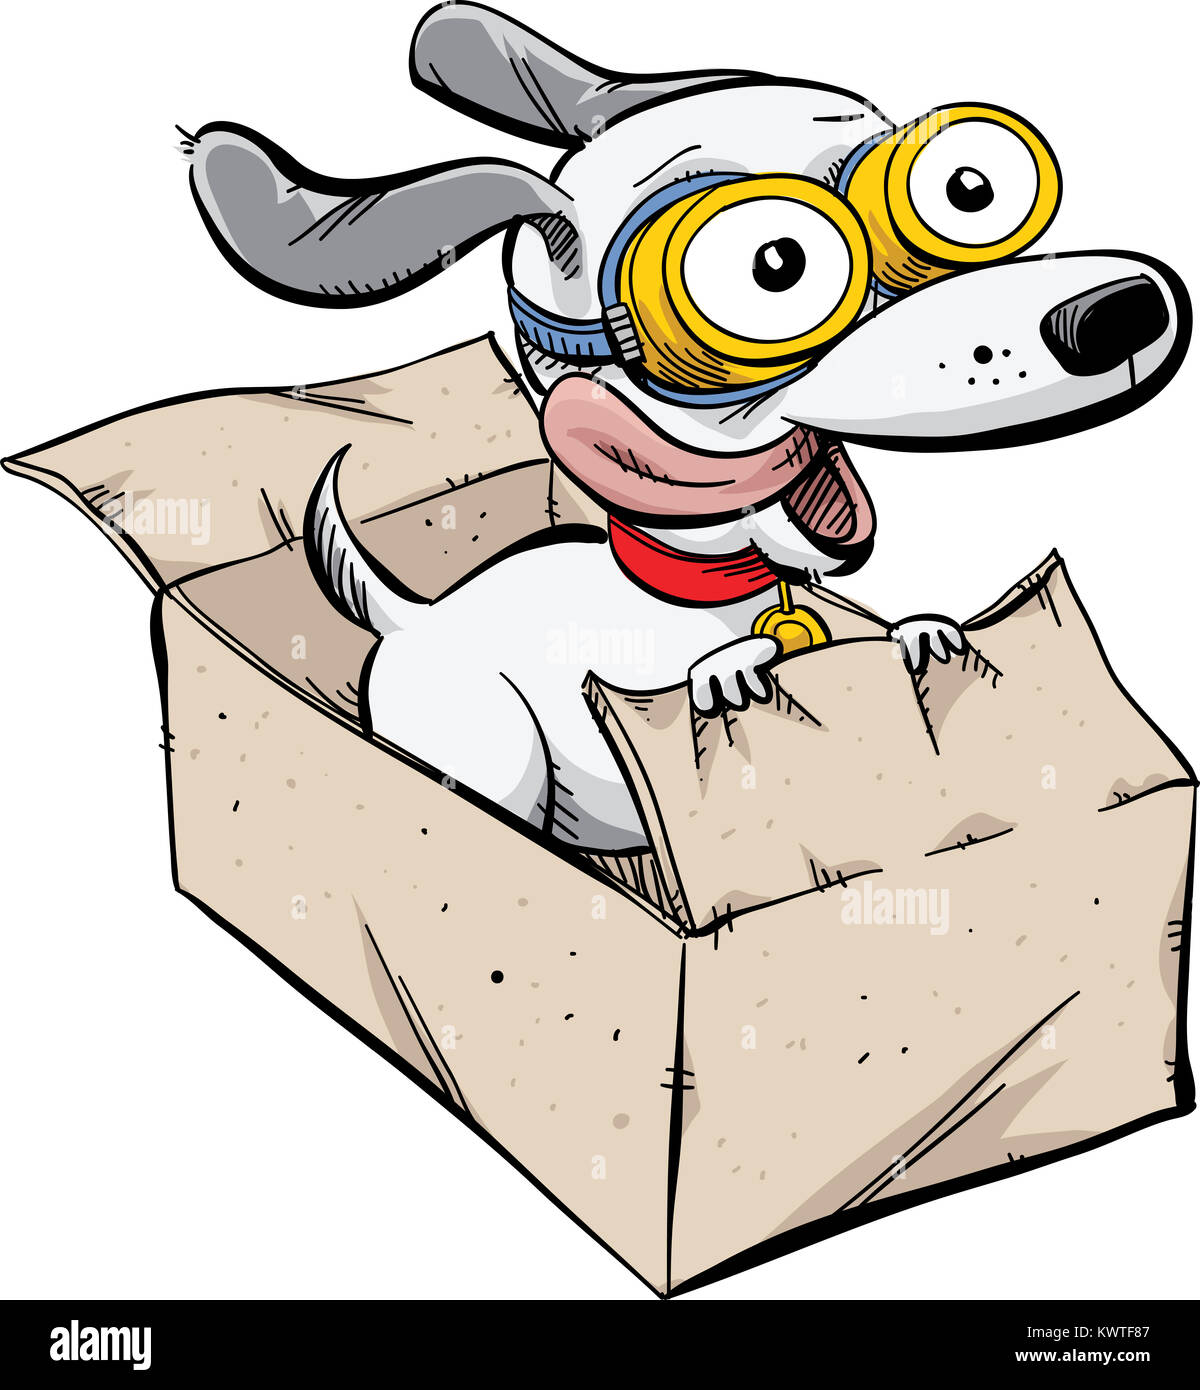 A cartoon dog wearing flight goggles, riding in a fast moving cardboard box. Stock Photo